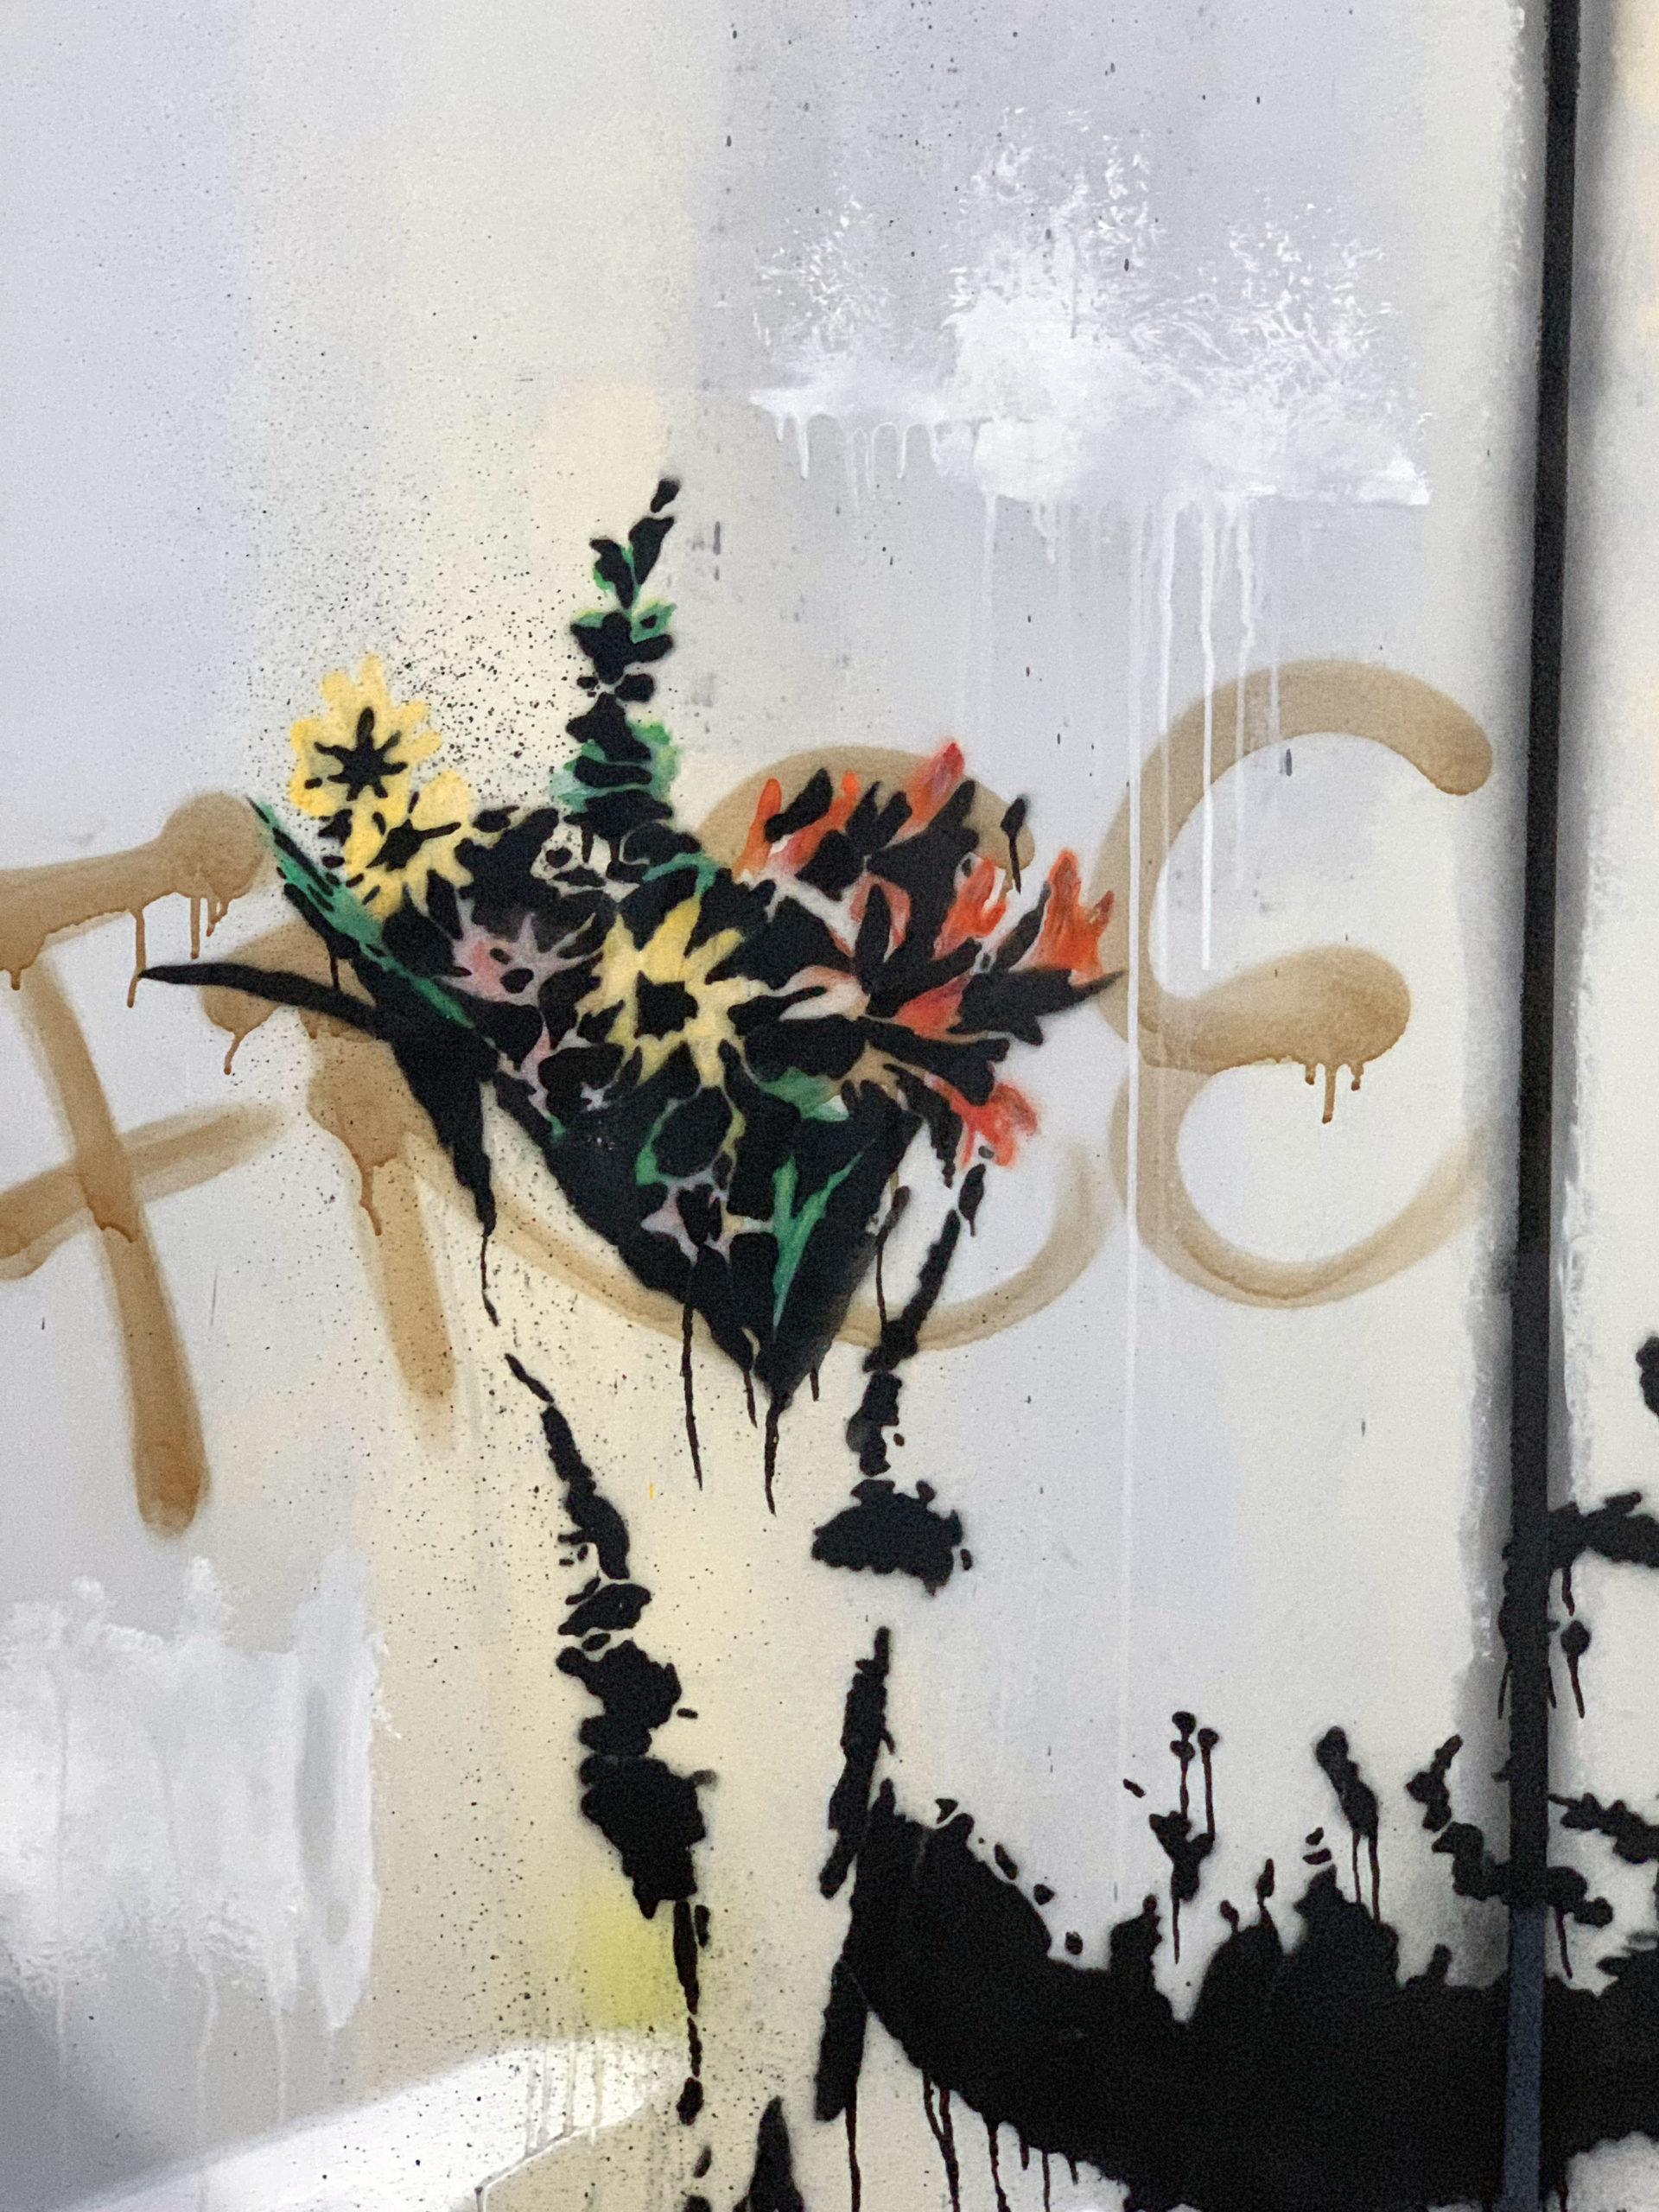 Banksy's Rage, The Flower Thrower – Everything you need to know